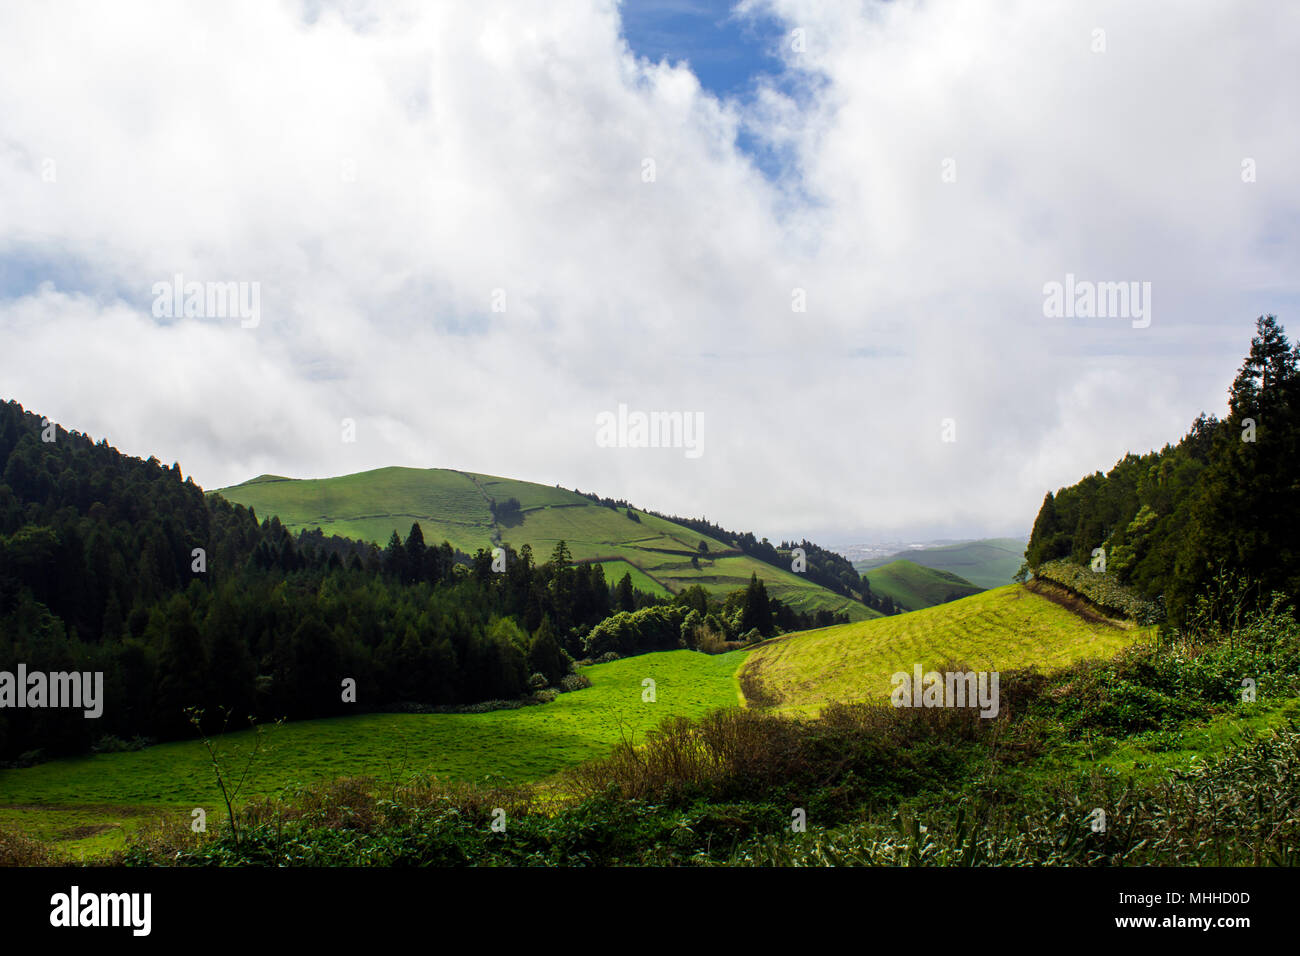 Green hill landscape scenery with breathtaking views over the horizon Stock Photo